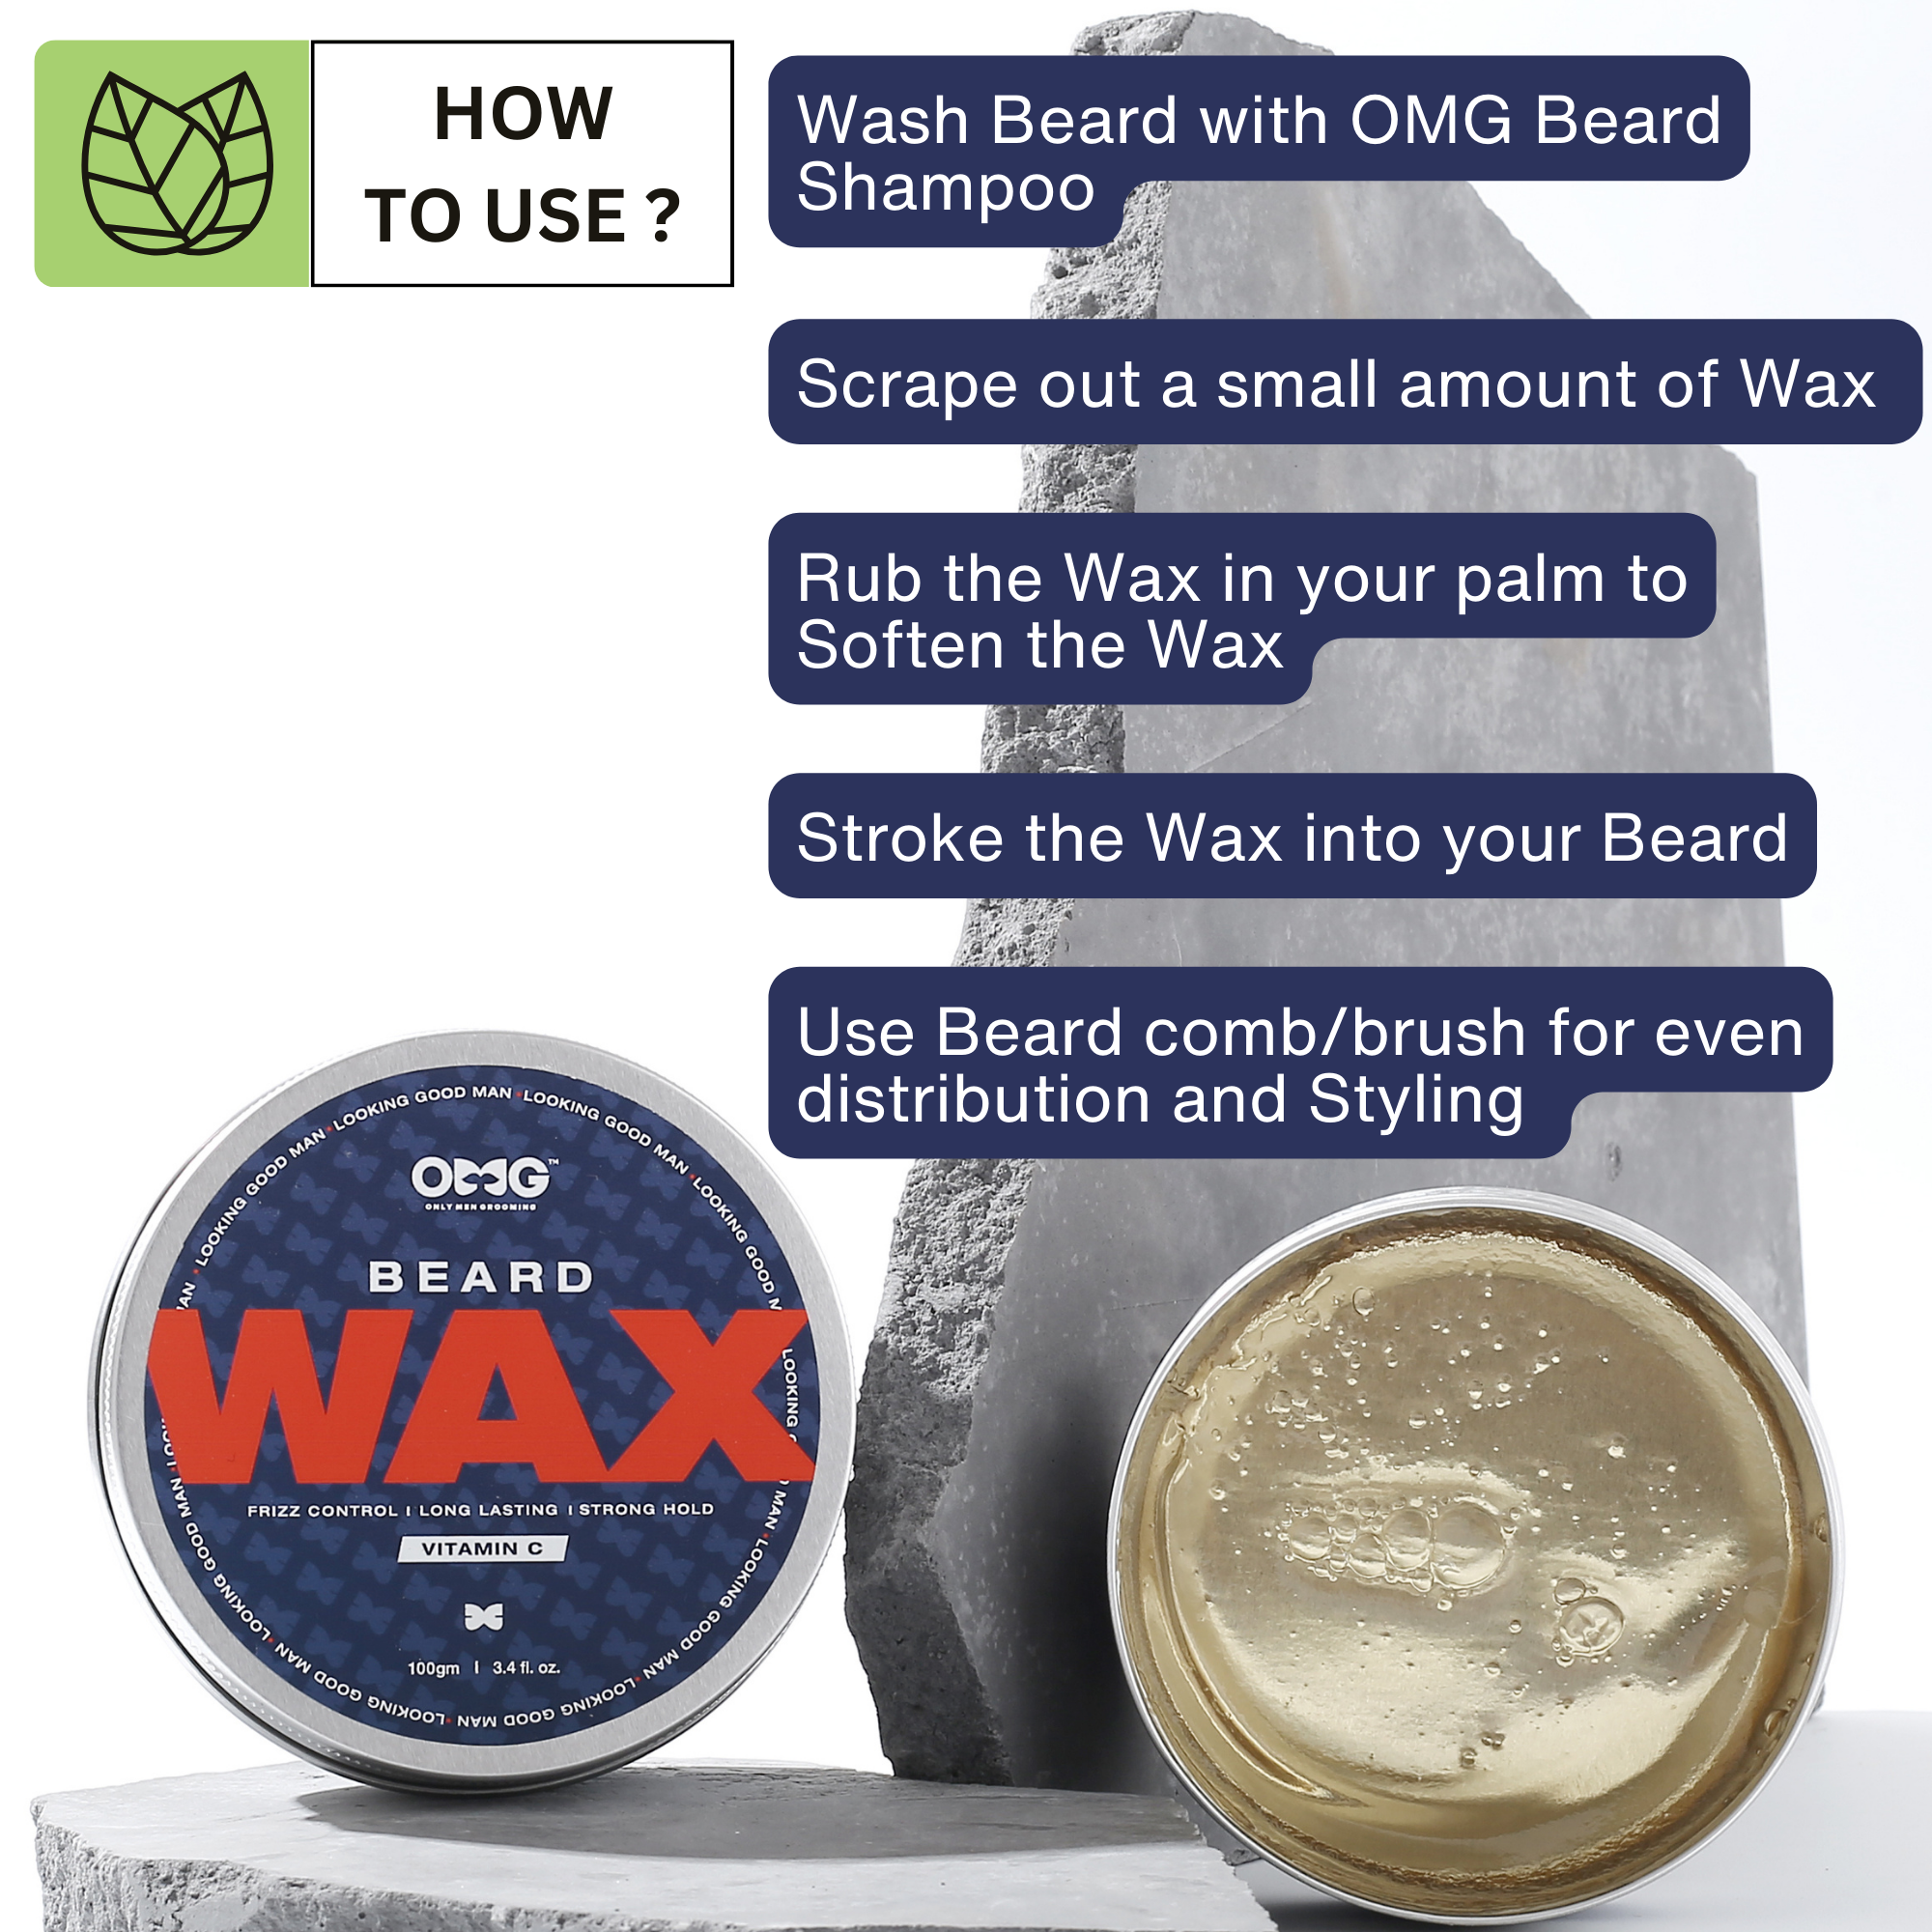 OMG BEARD WAX 100GM | FRIZZ CONTROL | | MOOCH WAX | LONG LASTING HOLD | STRONG HOLD | ENRICHED WITH VITAMIN C | 100% NATURAL INGREDIENTS